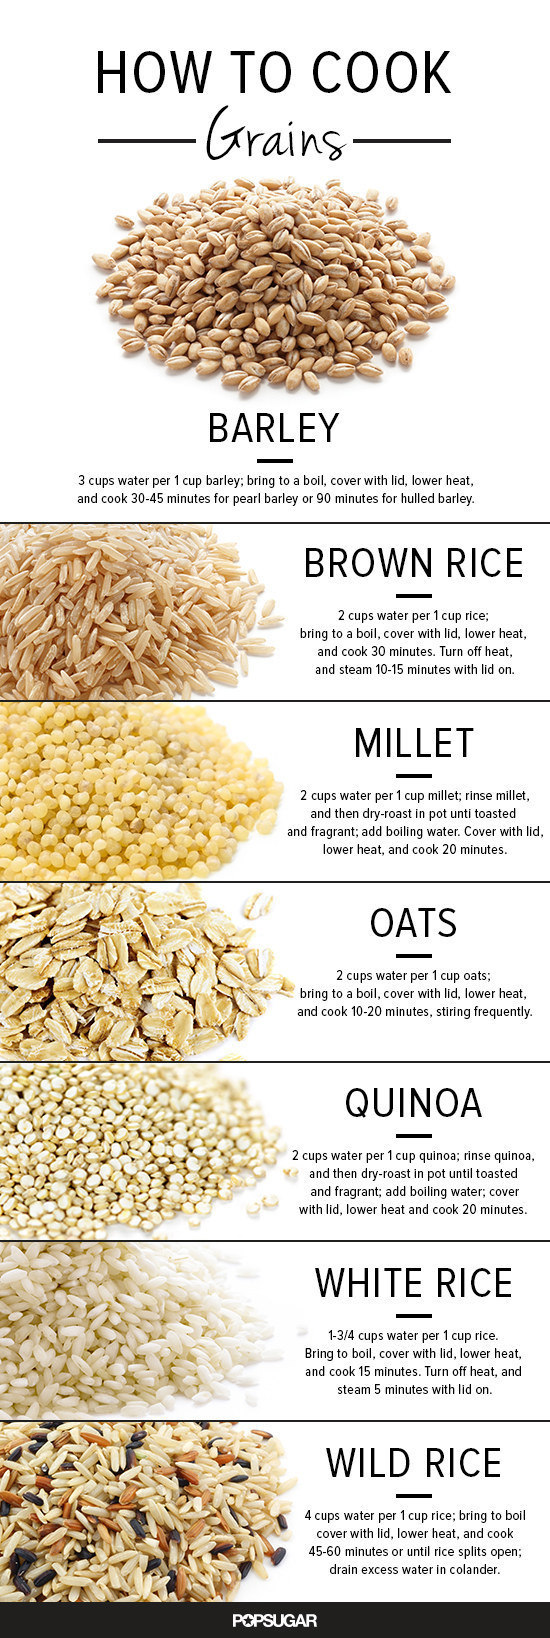 For directions on how to make every kind of grain: